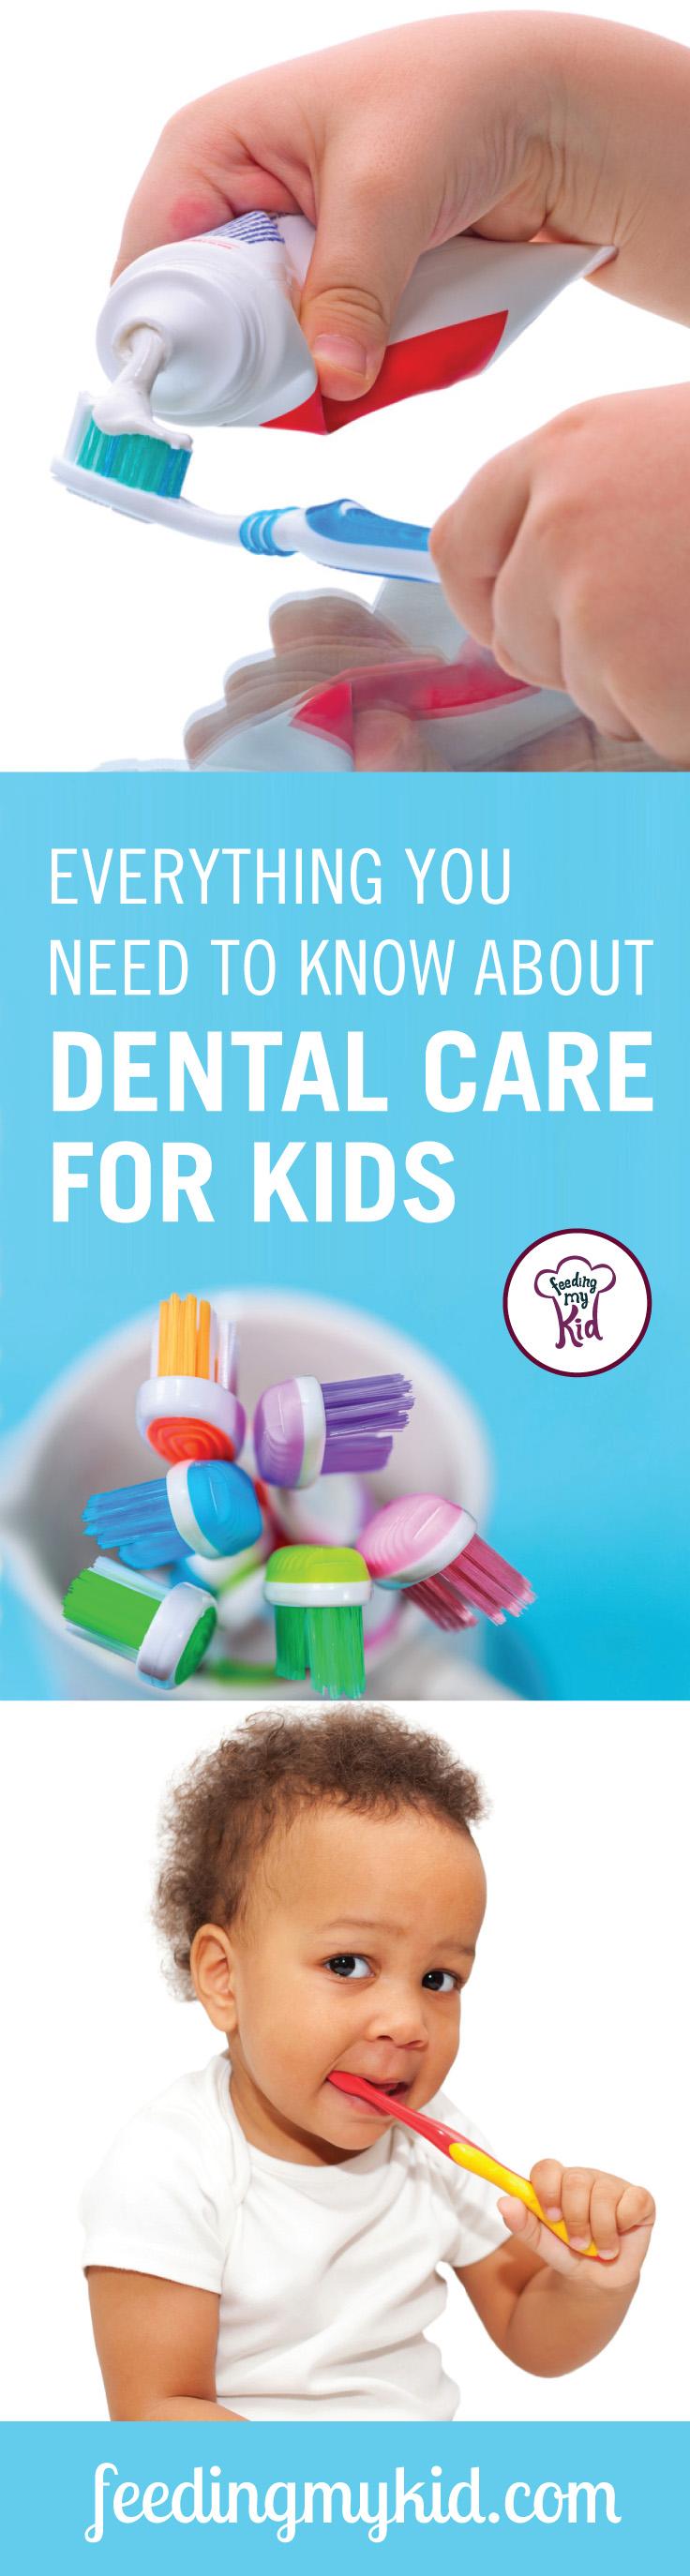 Check out this article about everything you need to know about dental care for kids. This kids dental care article will help you know just when to brush your kid’s teeth. Feeding My Kid is a website for parents, filled with all the information you need about how to raise your kids, from healthy tips to nutritious recipes. #dental #toothbrush #tips